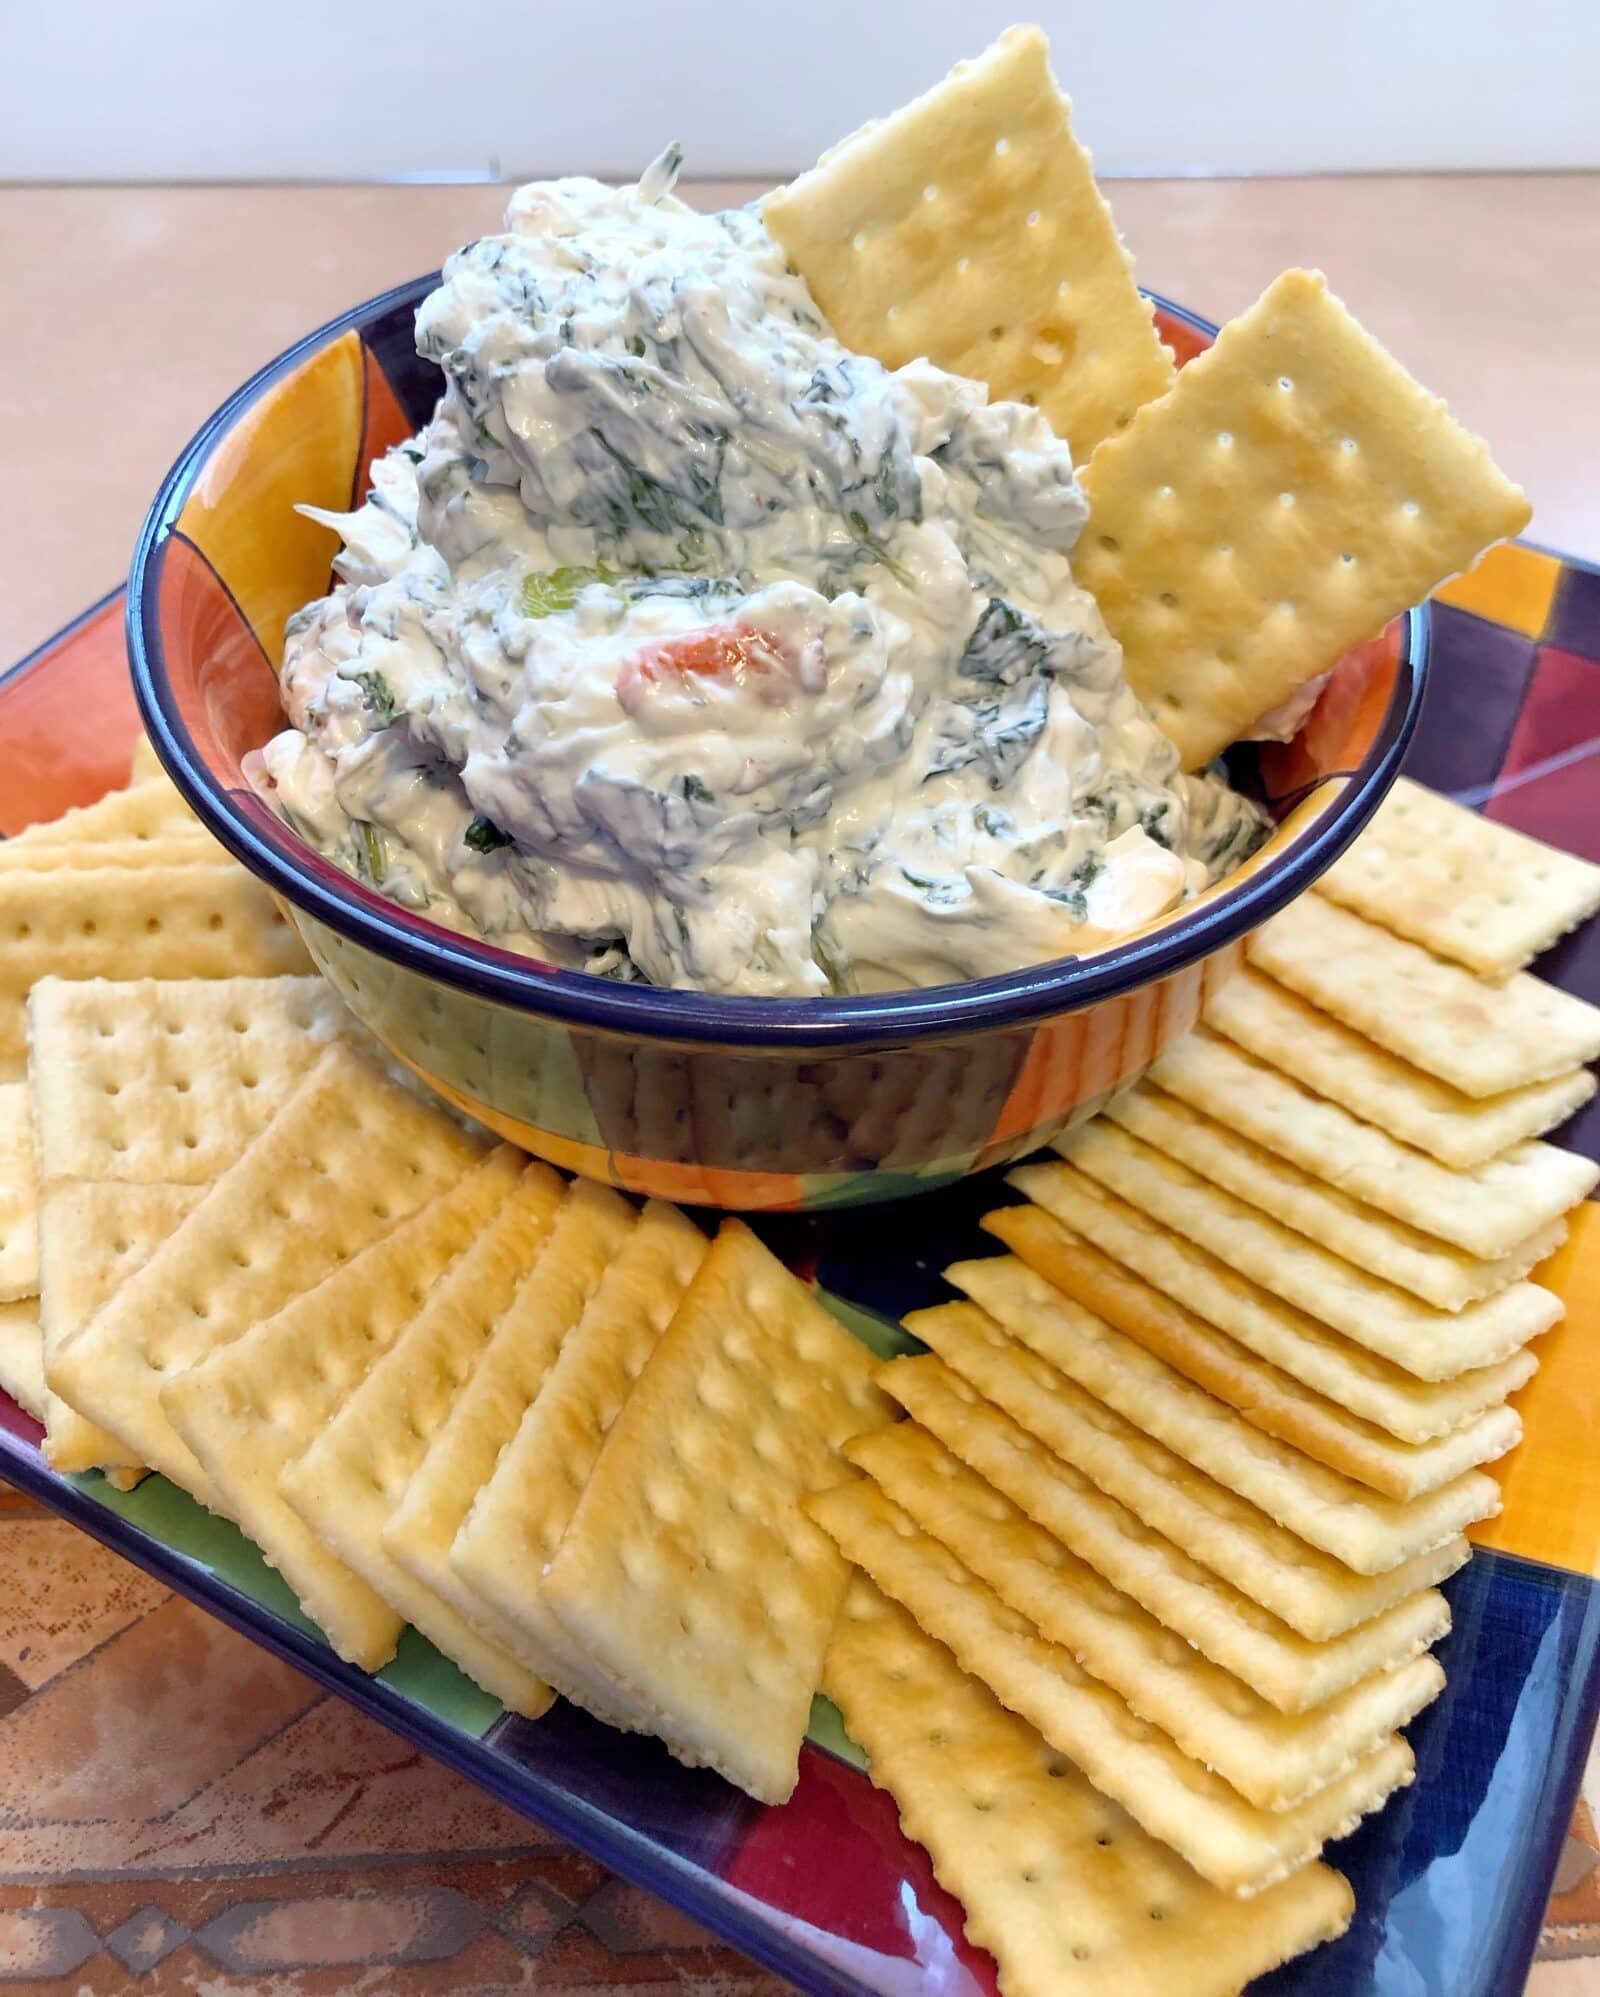 Knorr Spinach Dip Recipe Improved